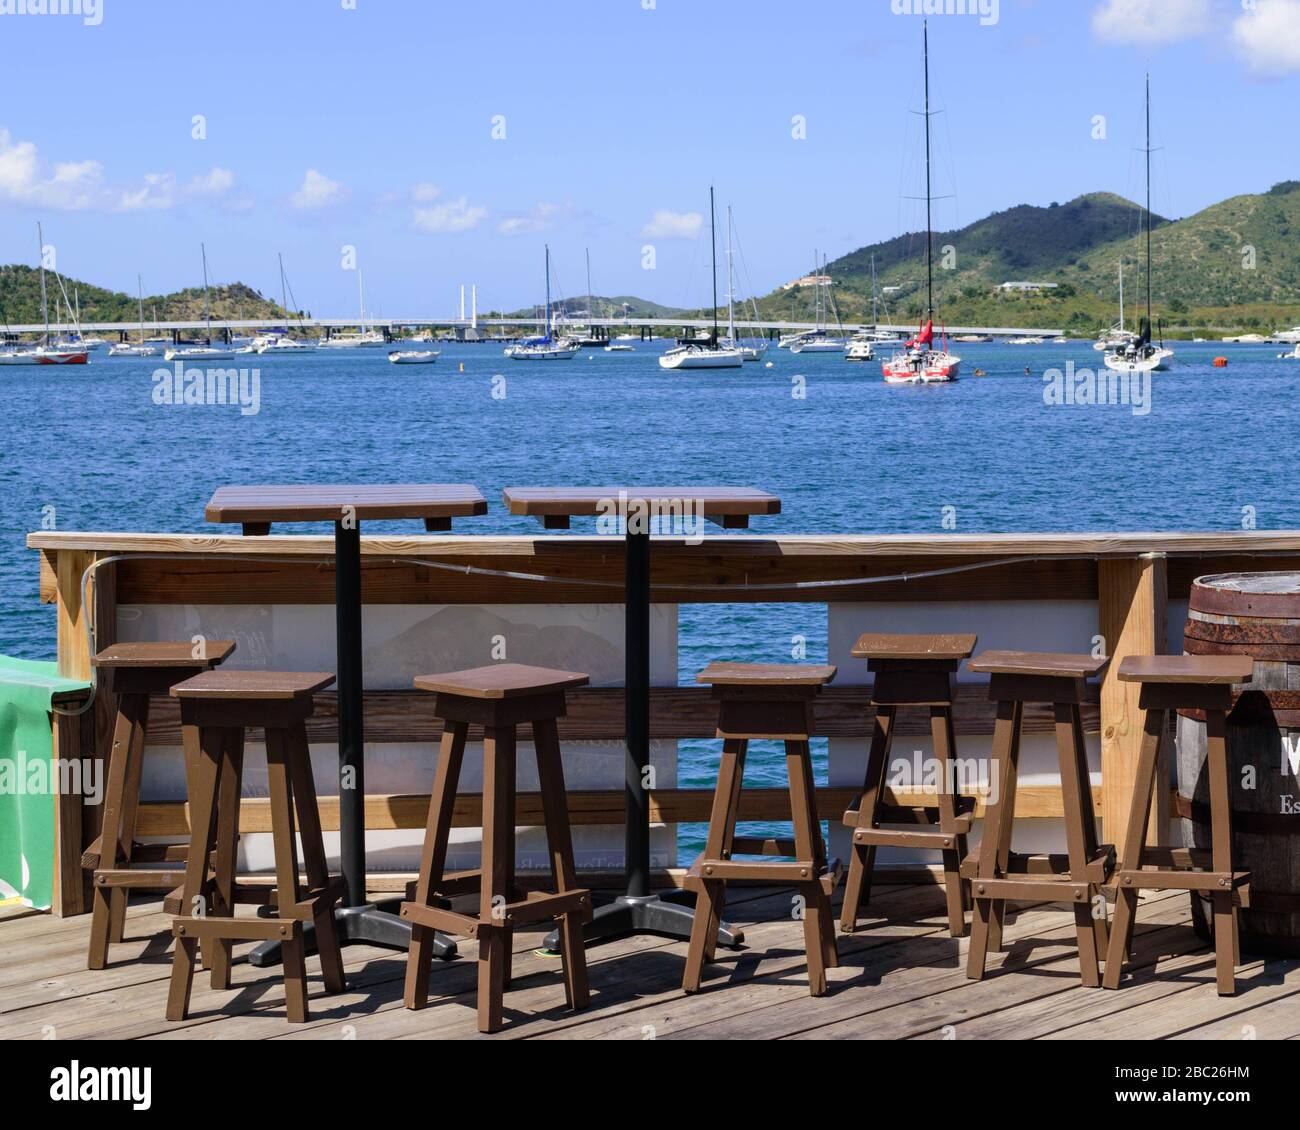 Impact of coronavirus on summer travel / tourism: normally busy, tables at SMYC Bar & Restaurant are empty while closed for Covid-19 Pandemic Stock Photo